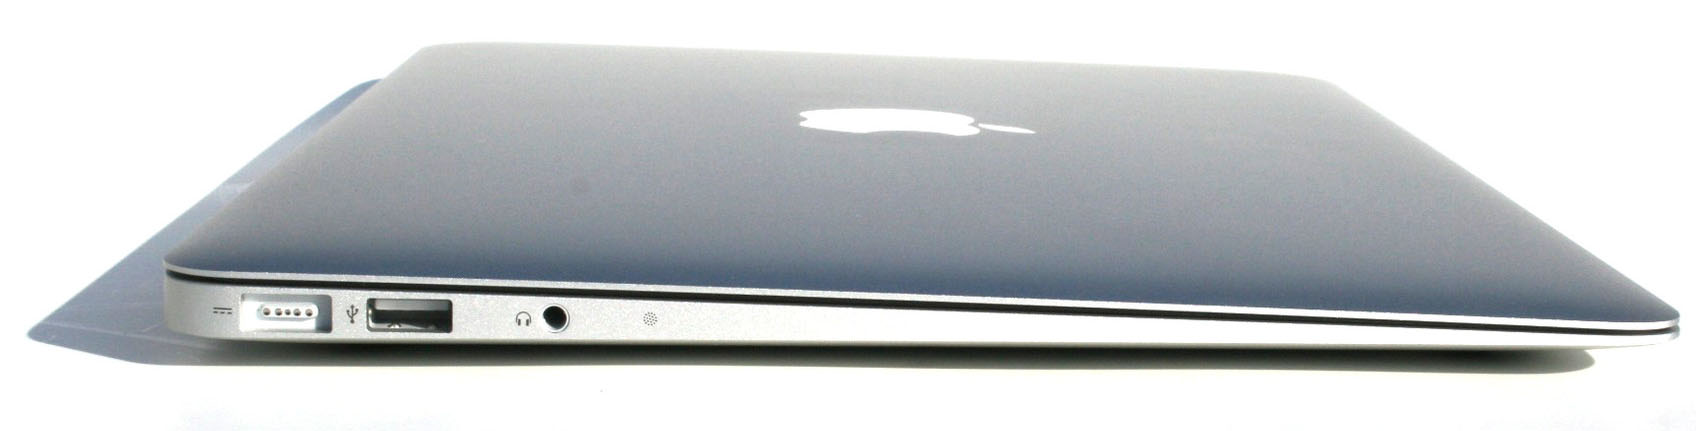 Apple MacBook Air 11 (Mid-2011) - Specs, Tests, and Prices 